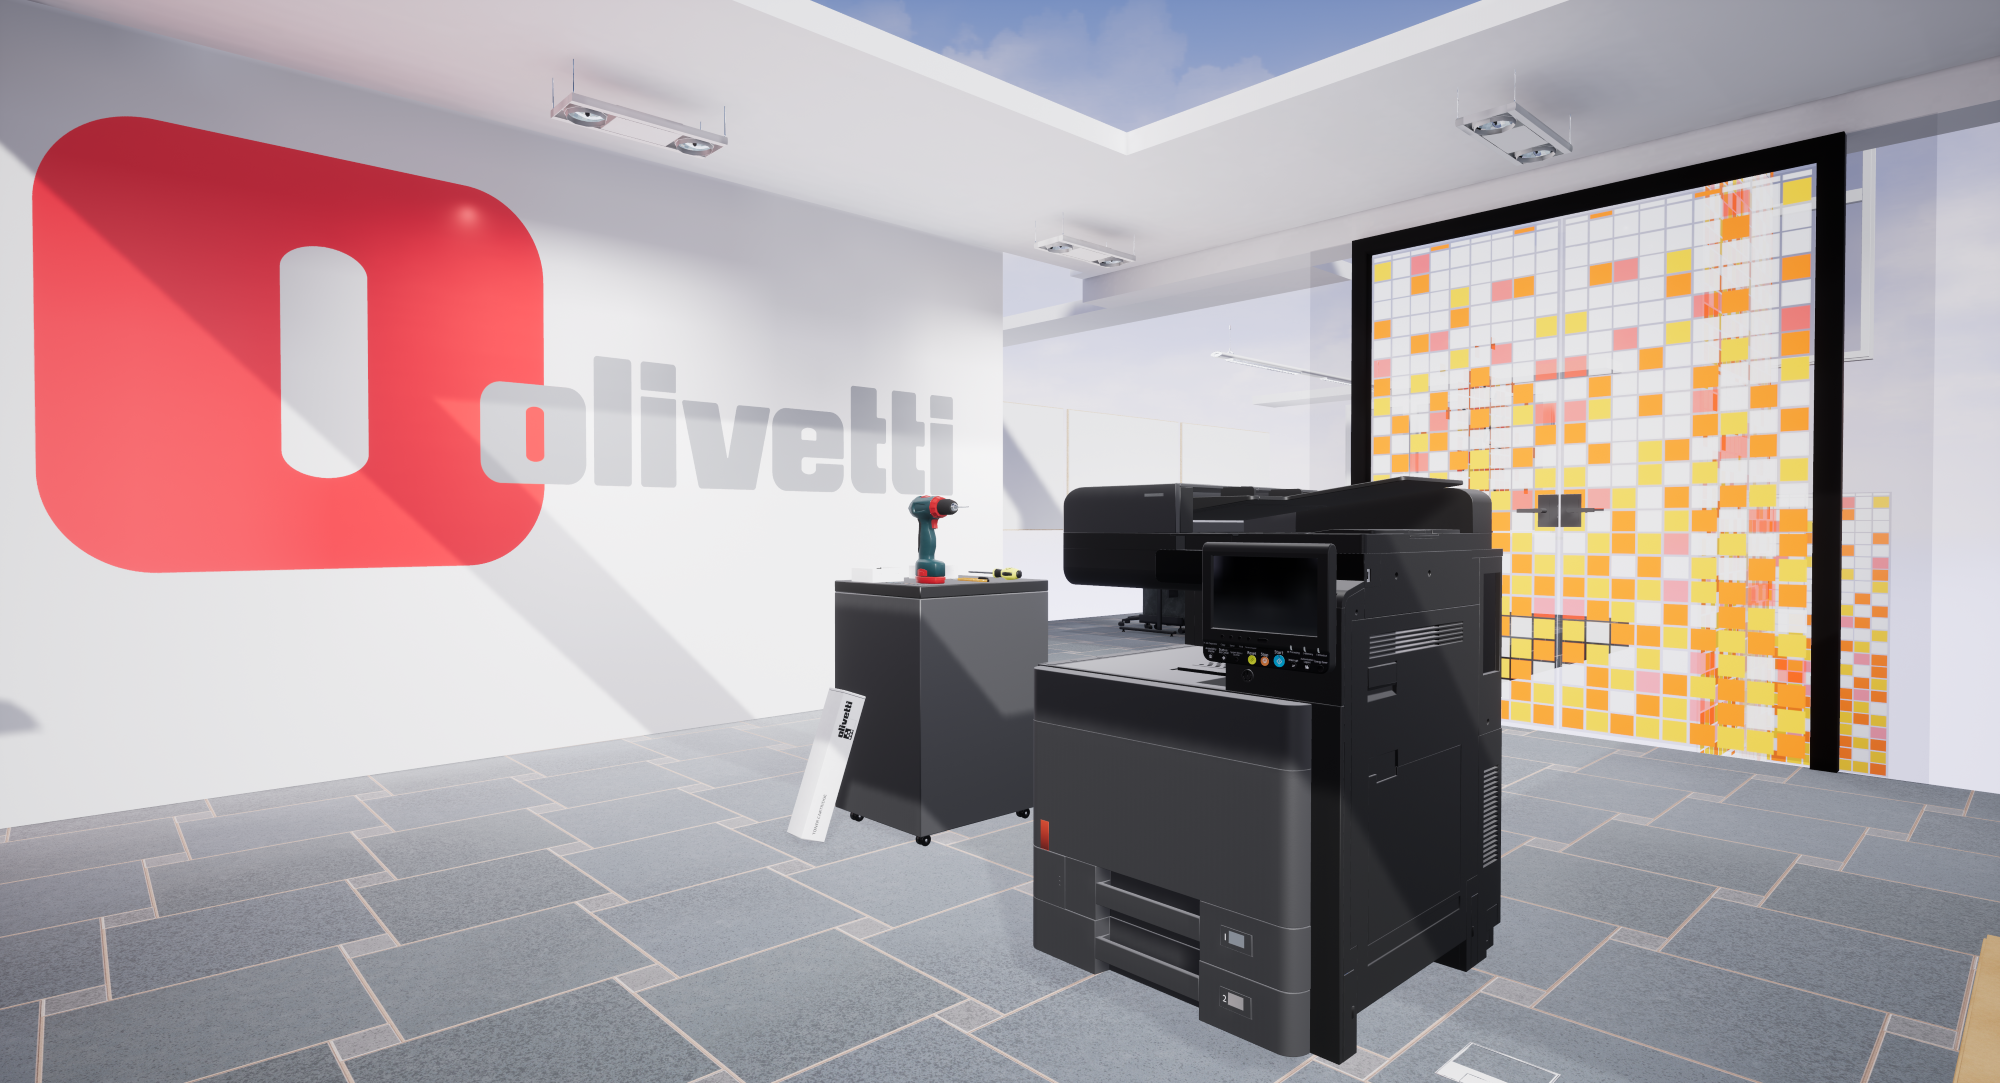 The simulator for the installation and maintenance of multifunction printers